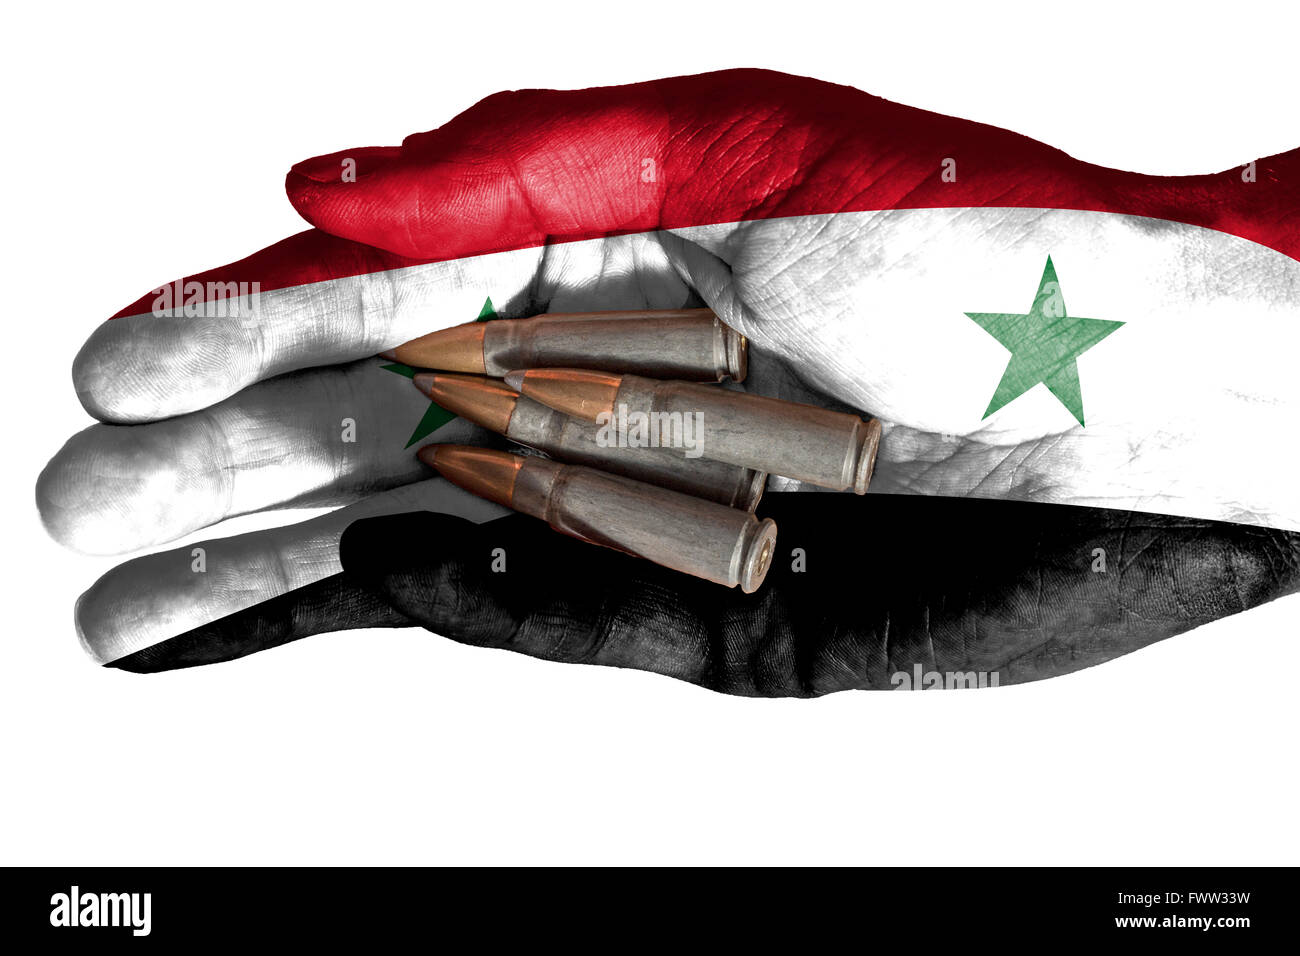 Flag of Iraq overlaid the hand of an adult man holding four bullets. Conceptual image for war, violence, conflicts. Image isolat Stock Photo